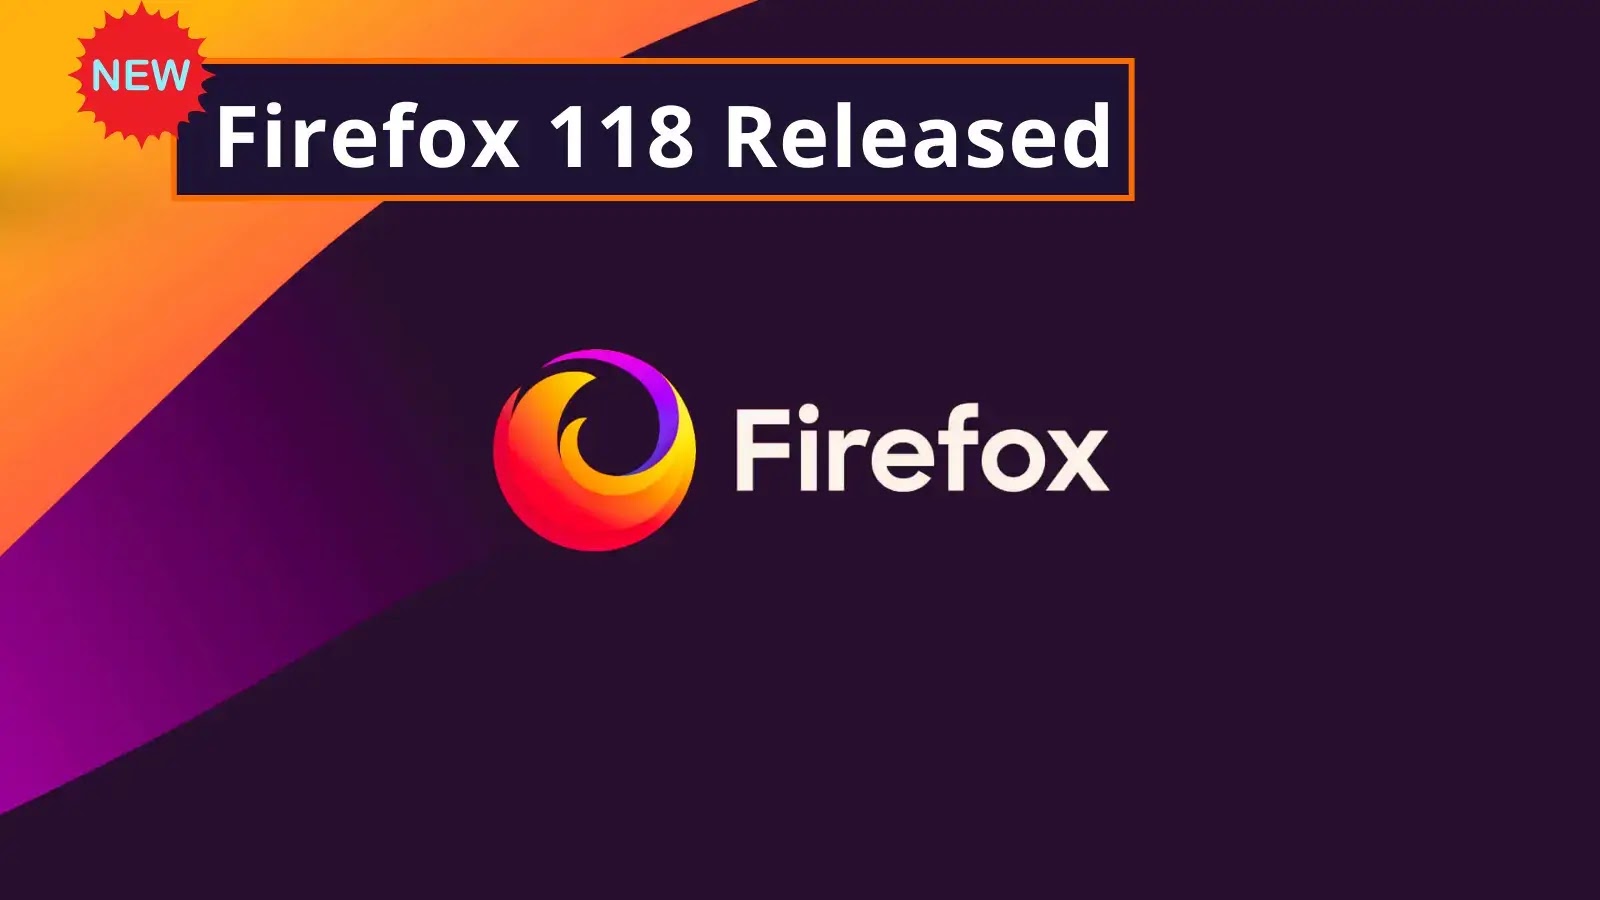 Firefox 118 Released with the fix for 6 High-Severity Vulnerabilities